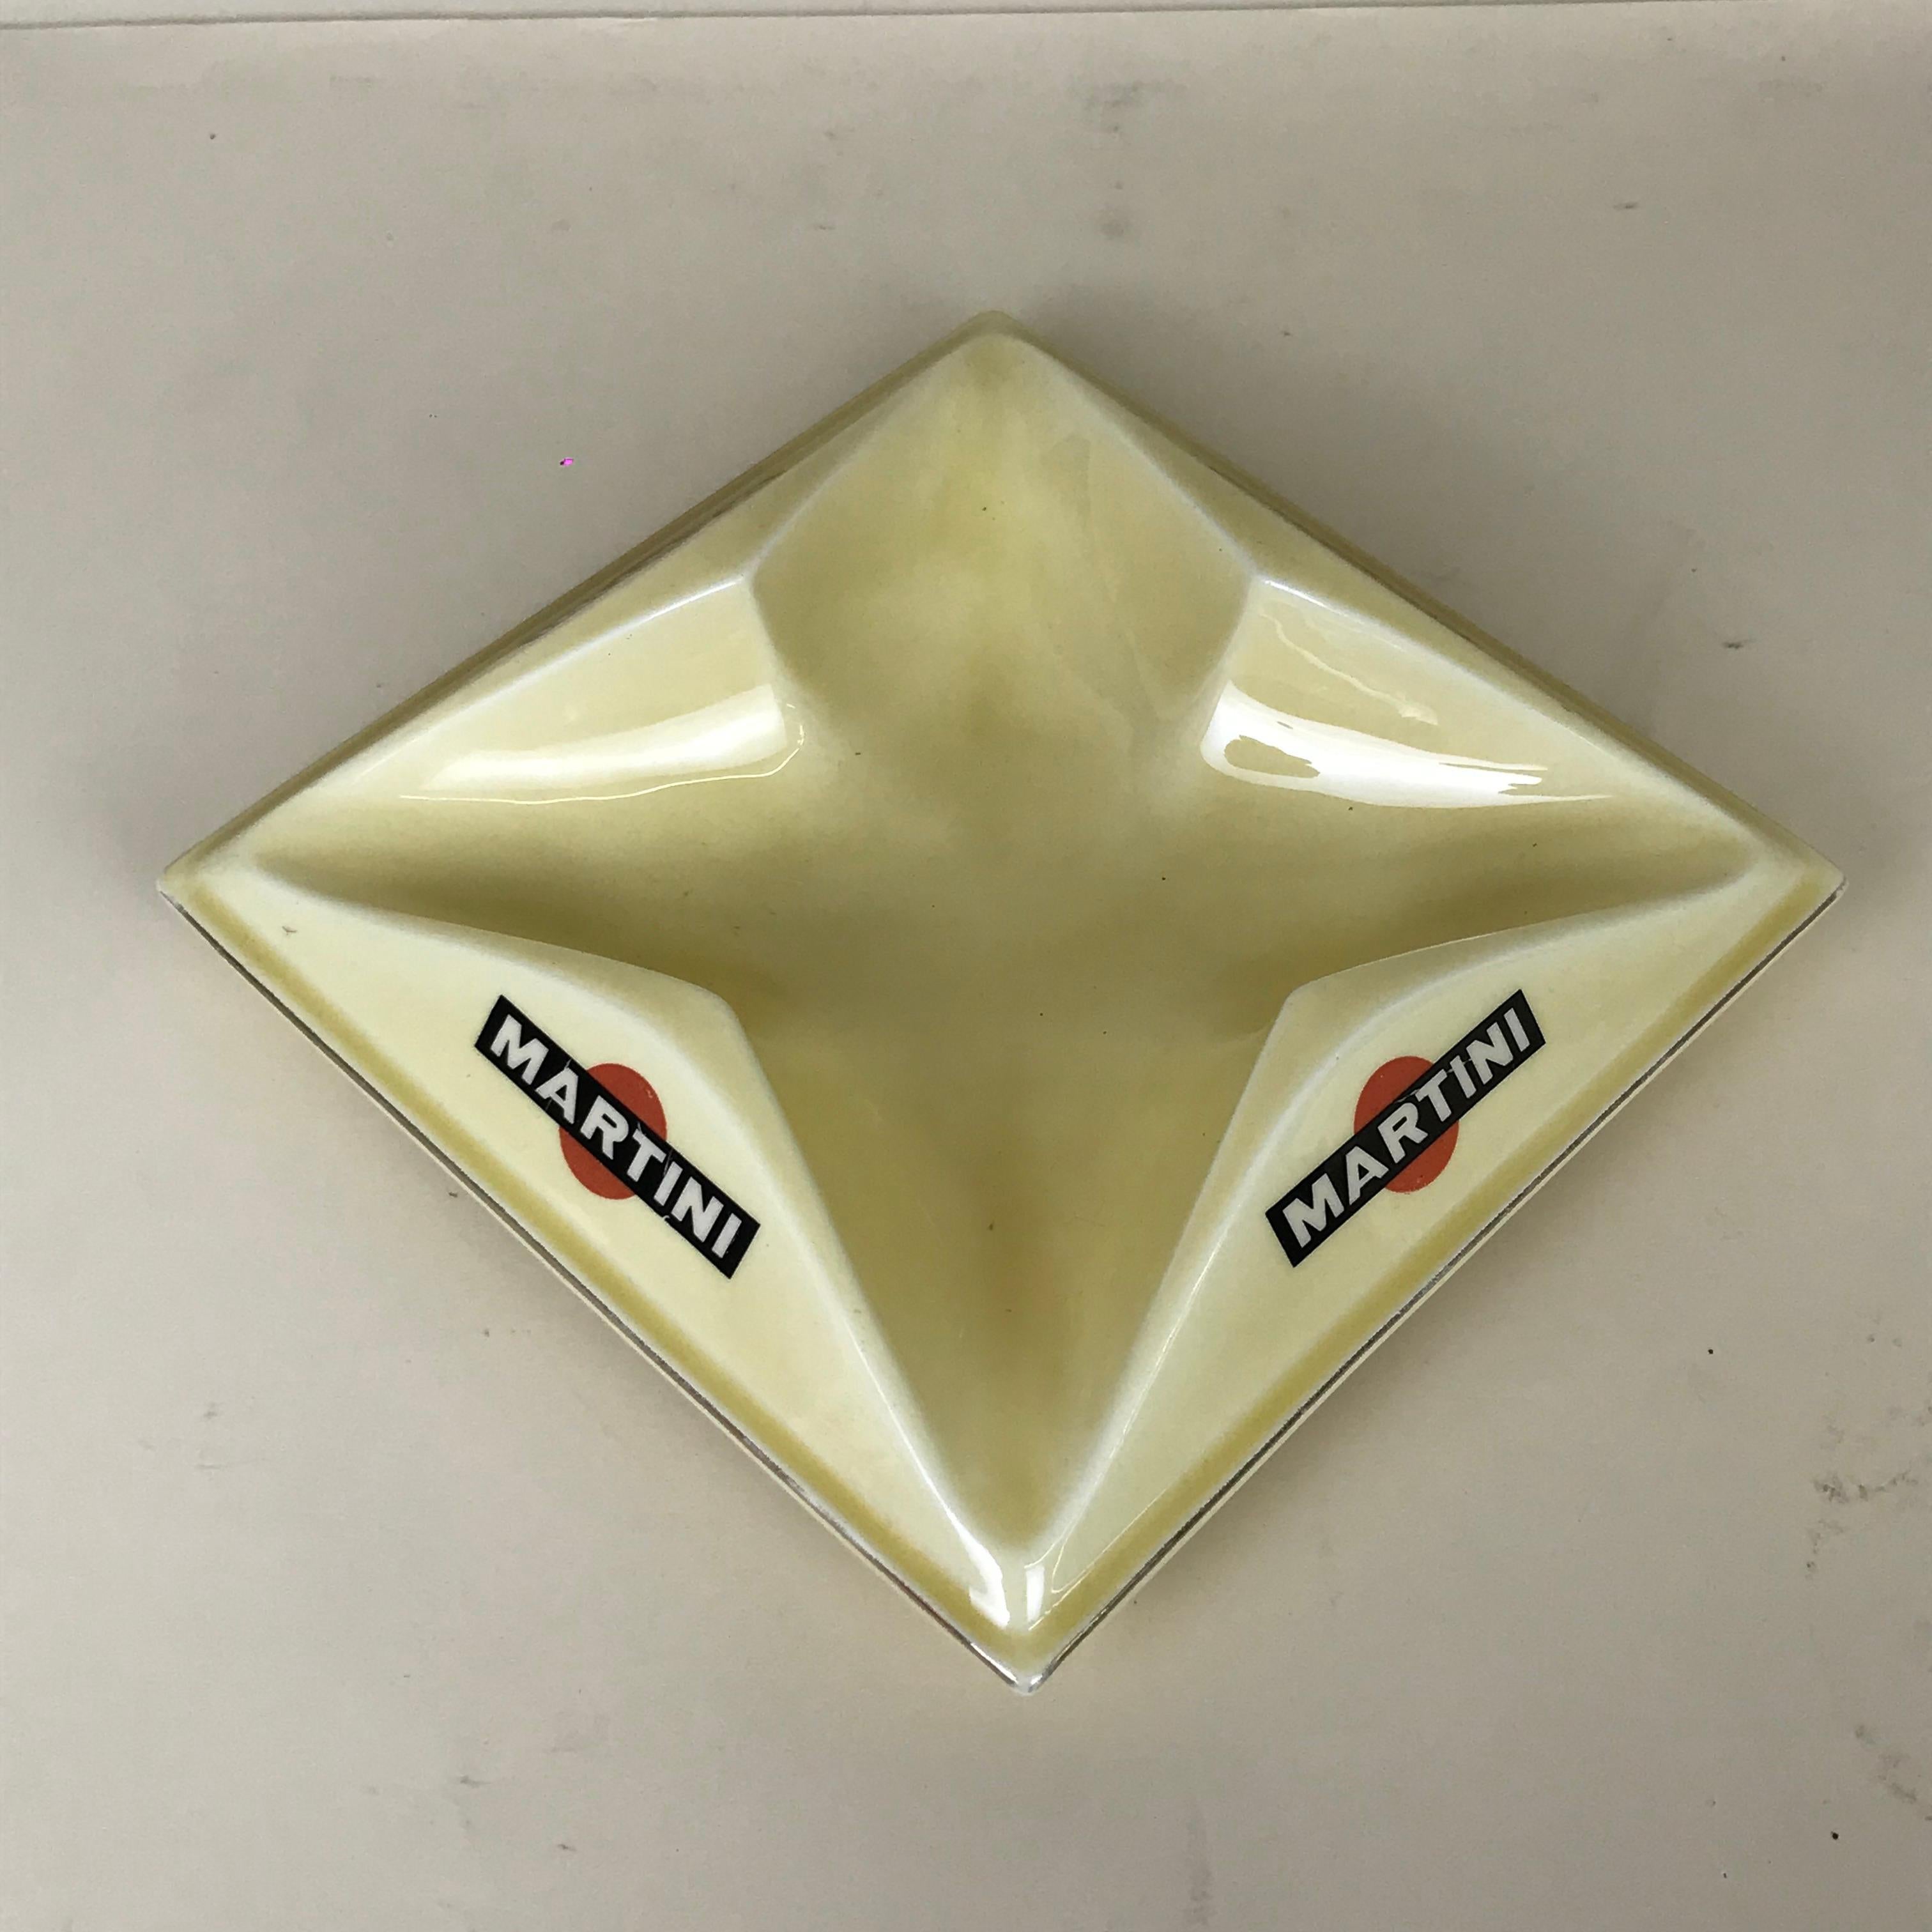 1970s French large cream ceramic bistro ashtray with metal rimmed profile and Martini logo on all four sides.

Marked on bottom: 